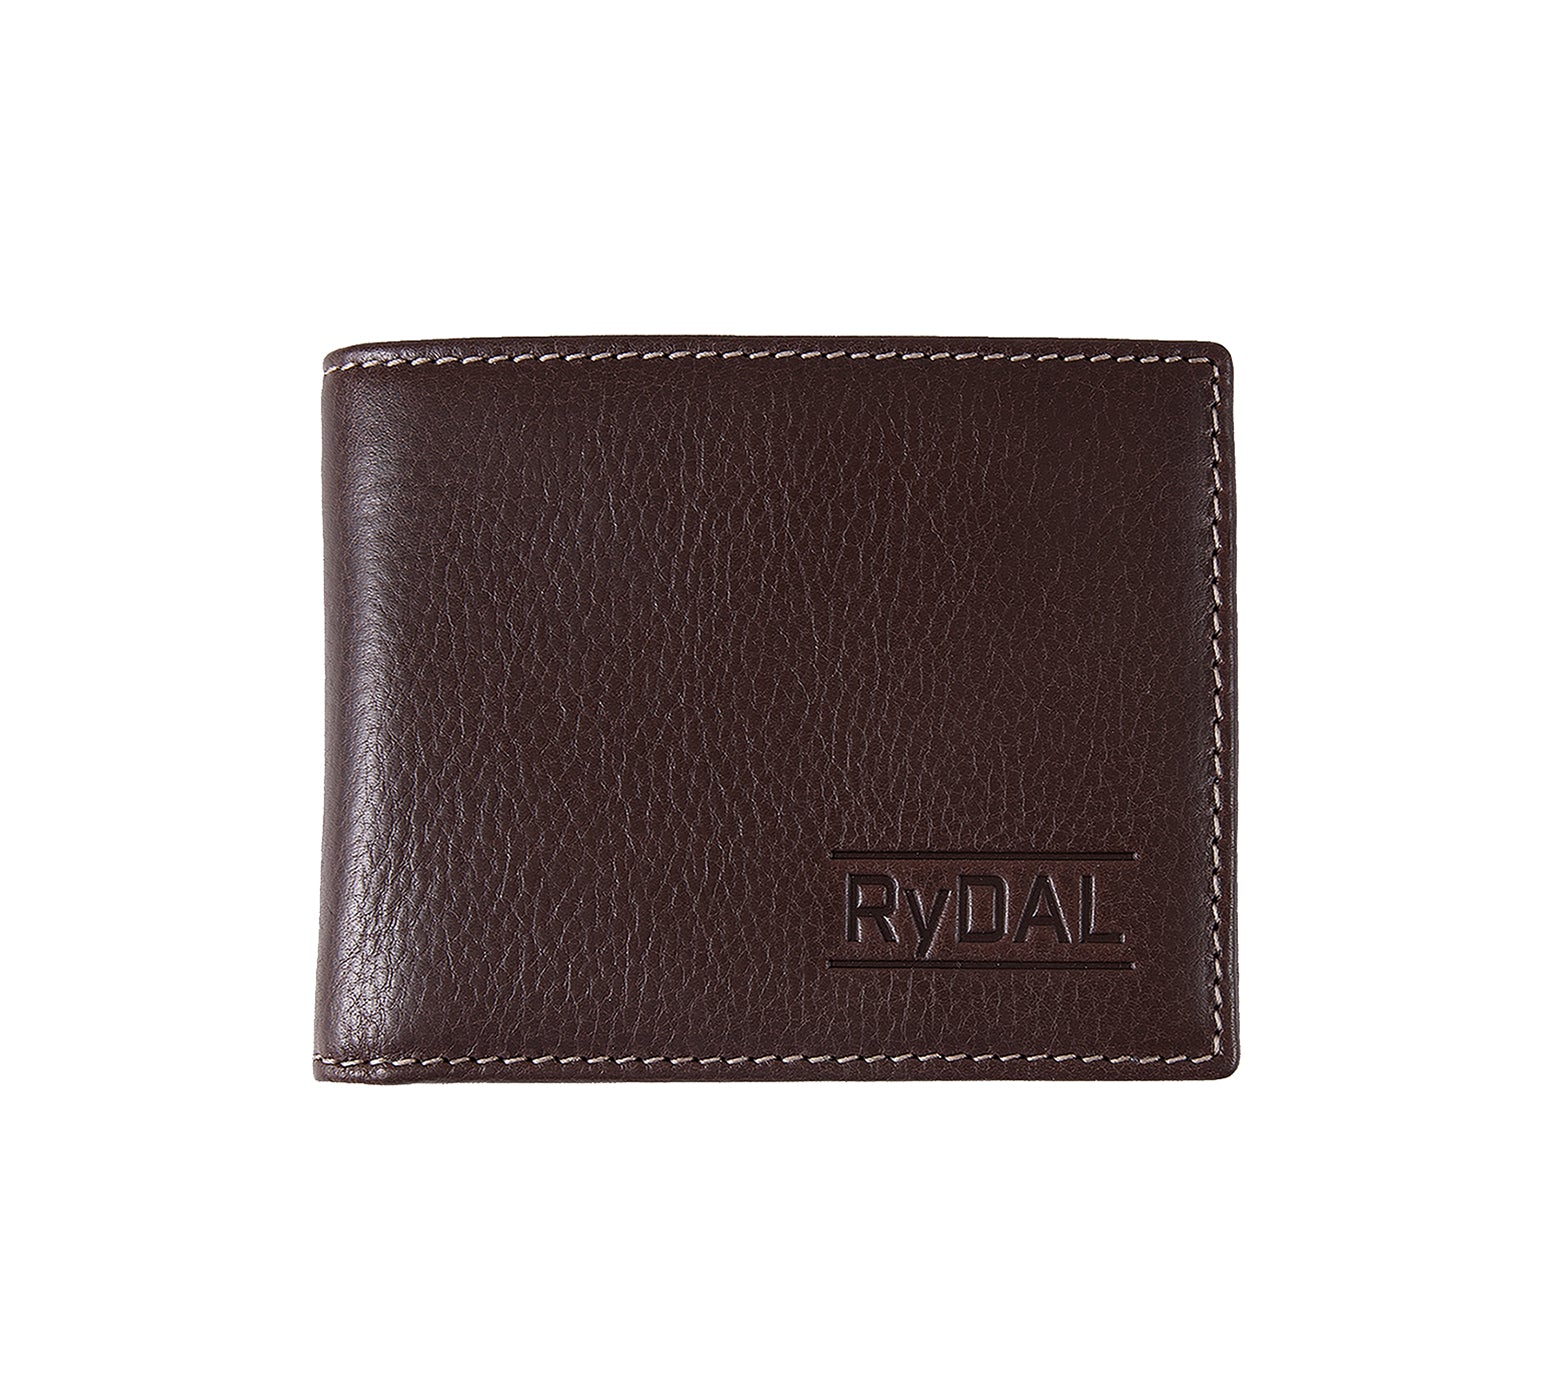 Mens Leather Wallet with Coin Pocket from Rydal in 'Dark Brown'.